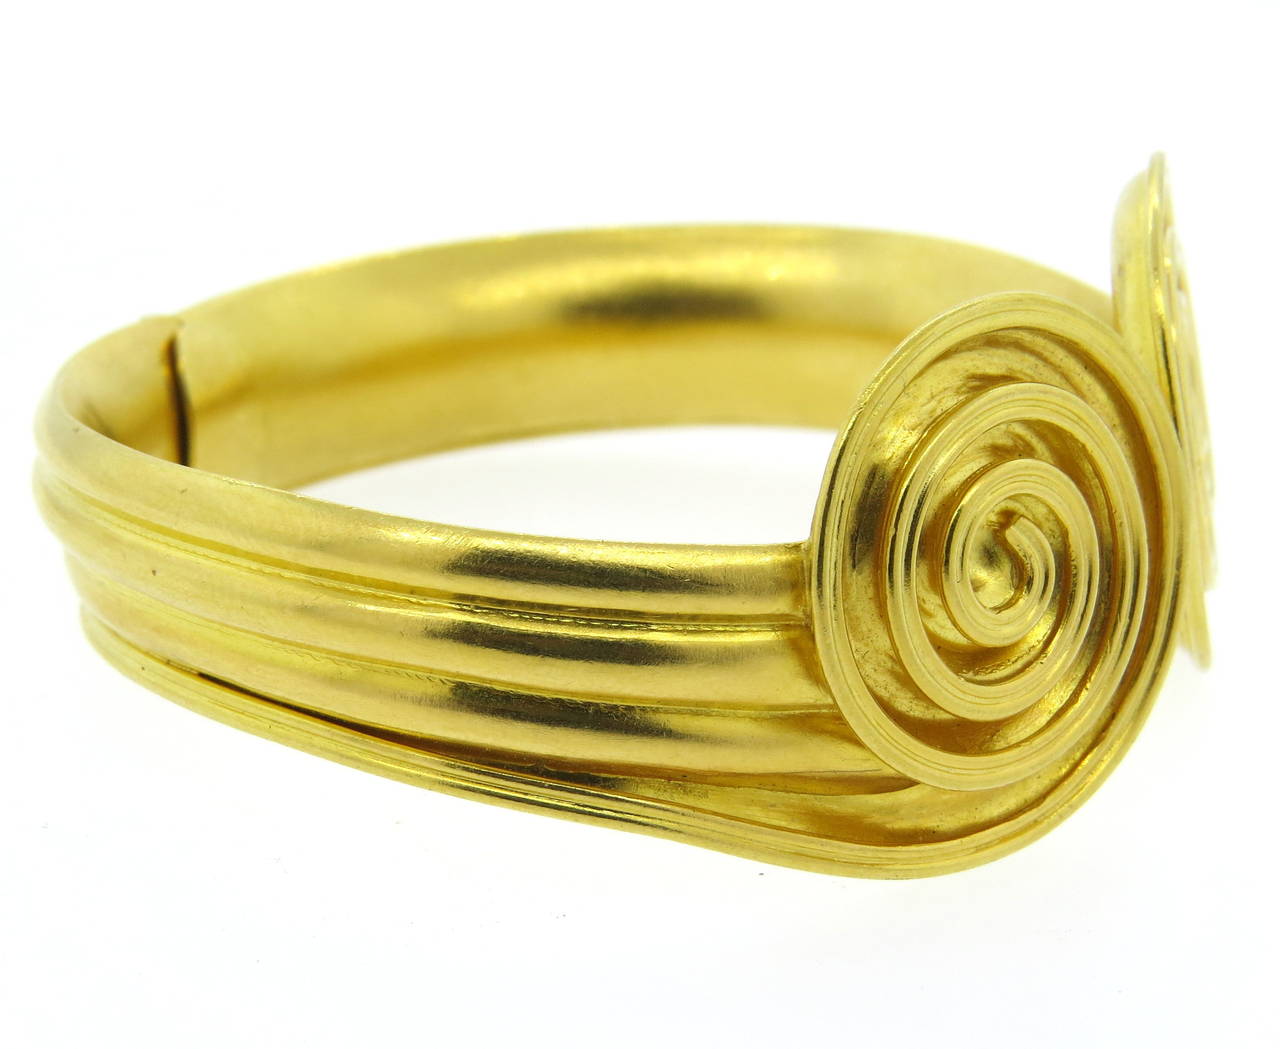 An 18k yellow gold bracelet in a swirl motif.  Crafted by Ilias Lalaounis, the bracelet comfortably fits up to a 6.5